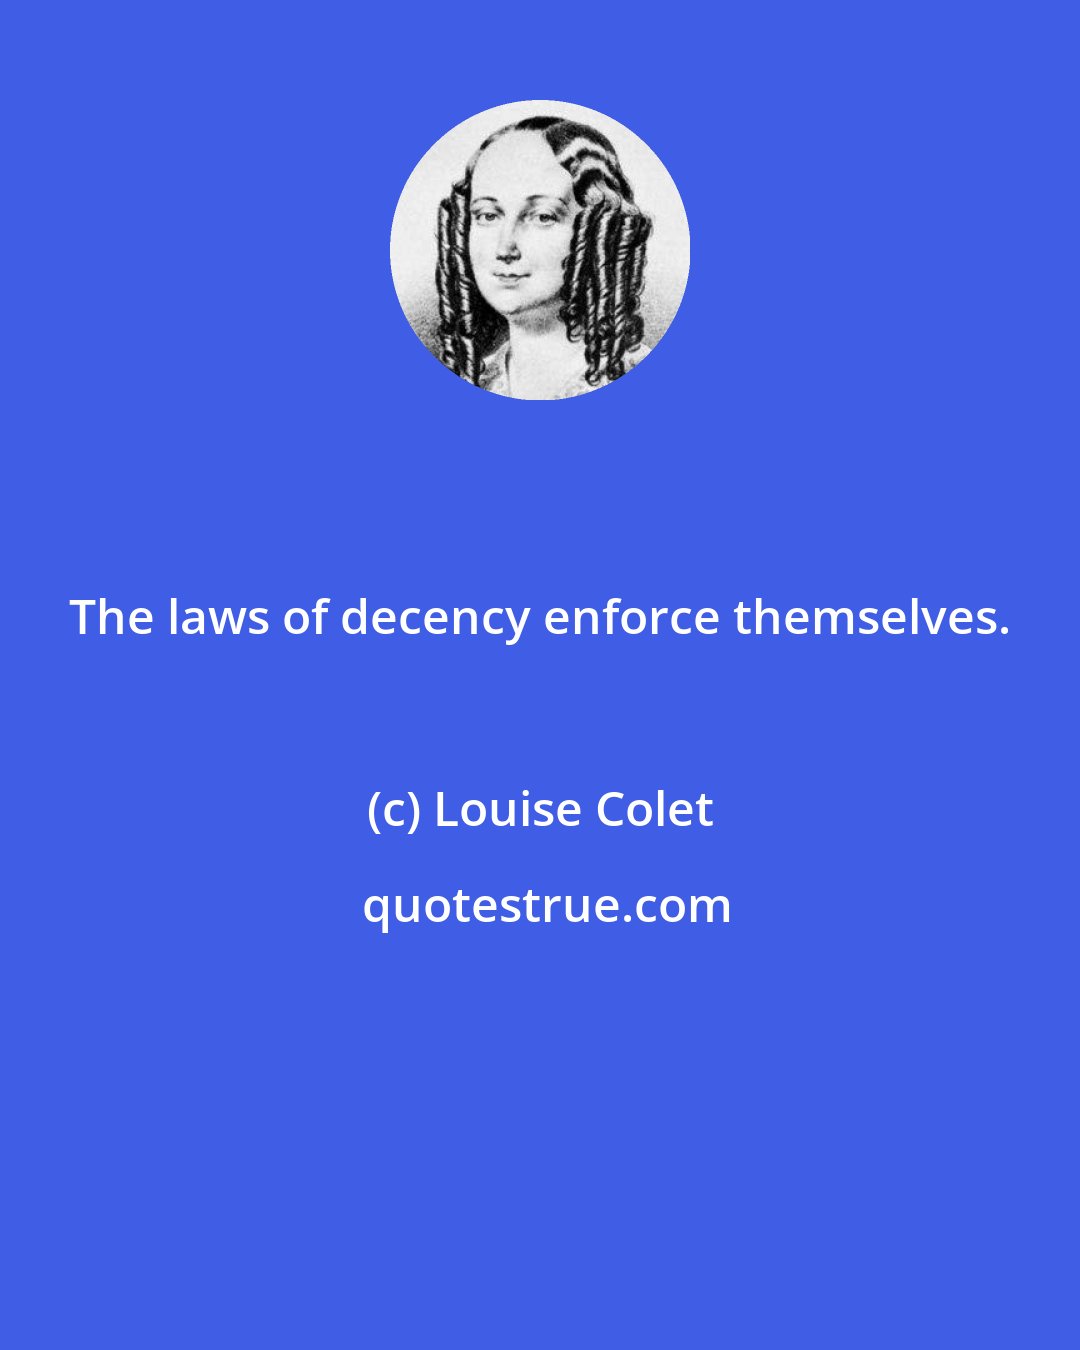 Louise Colet: The laws of decency enforce themselves.